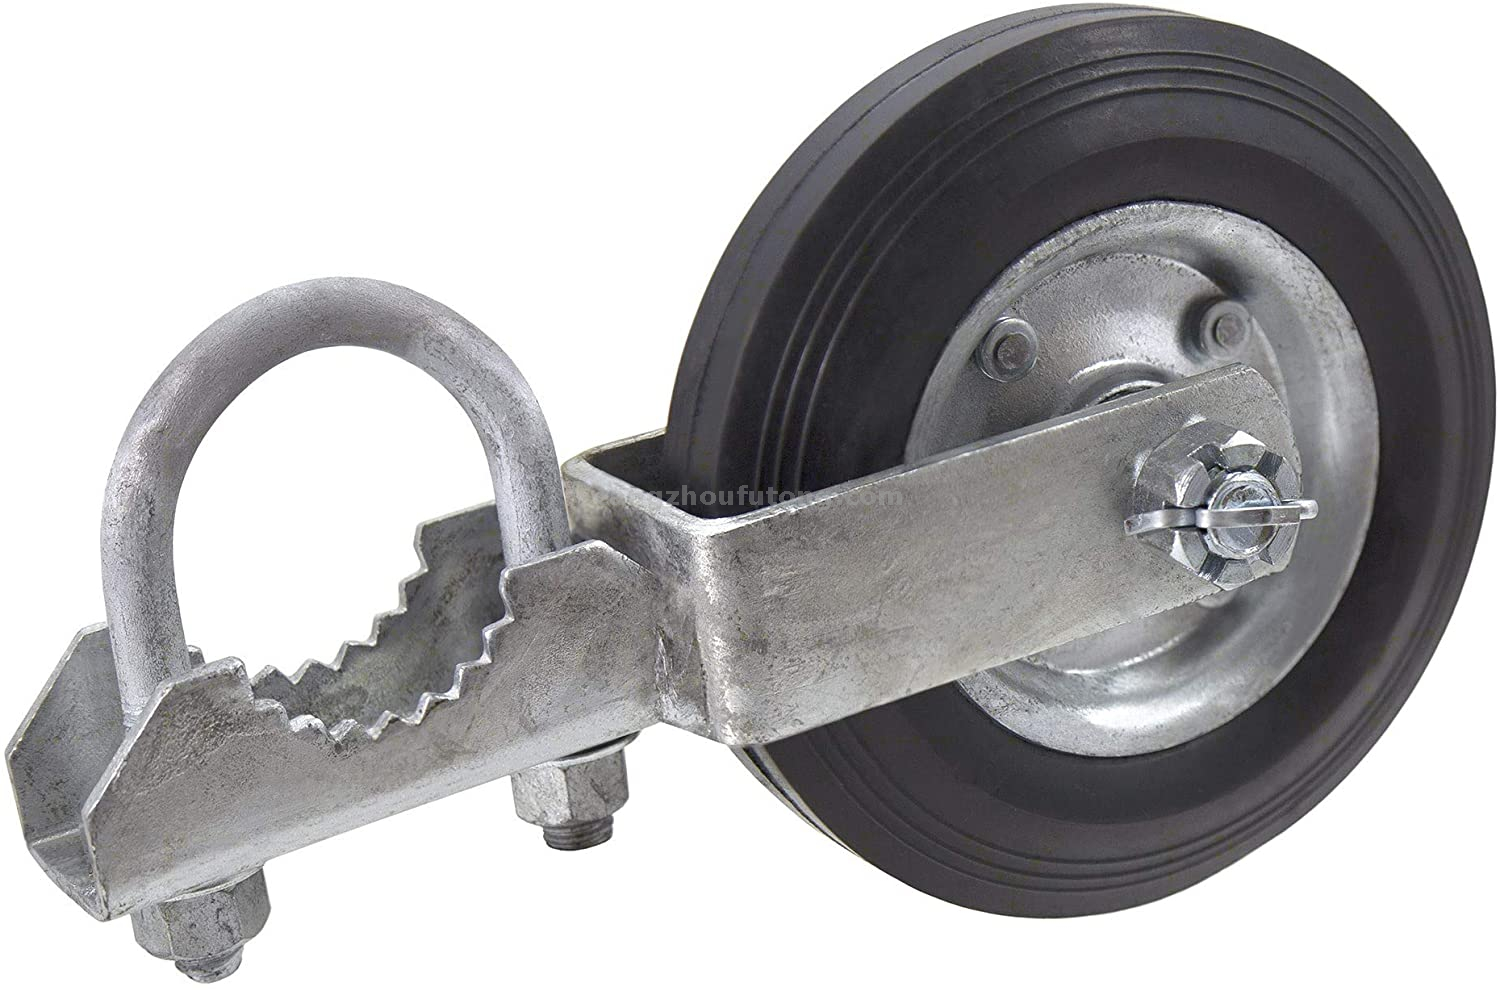 Heavy Duty Metal Spring Loaded 4-Inch Gate Caster Wheel with Rubber